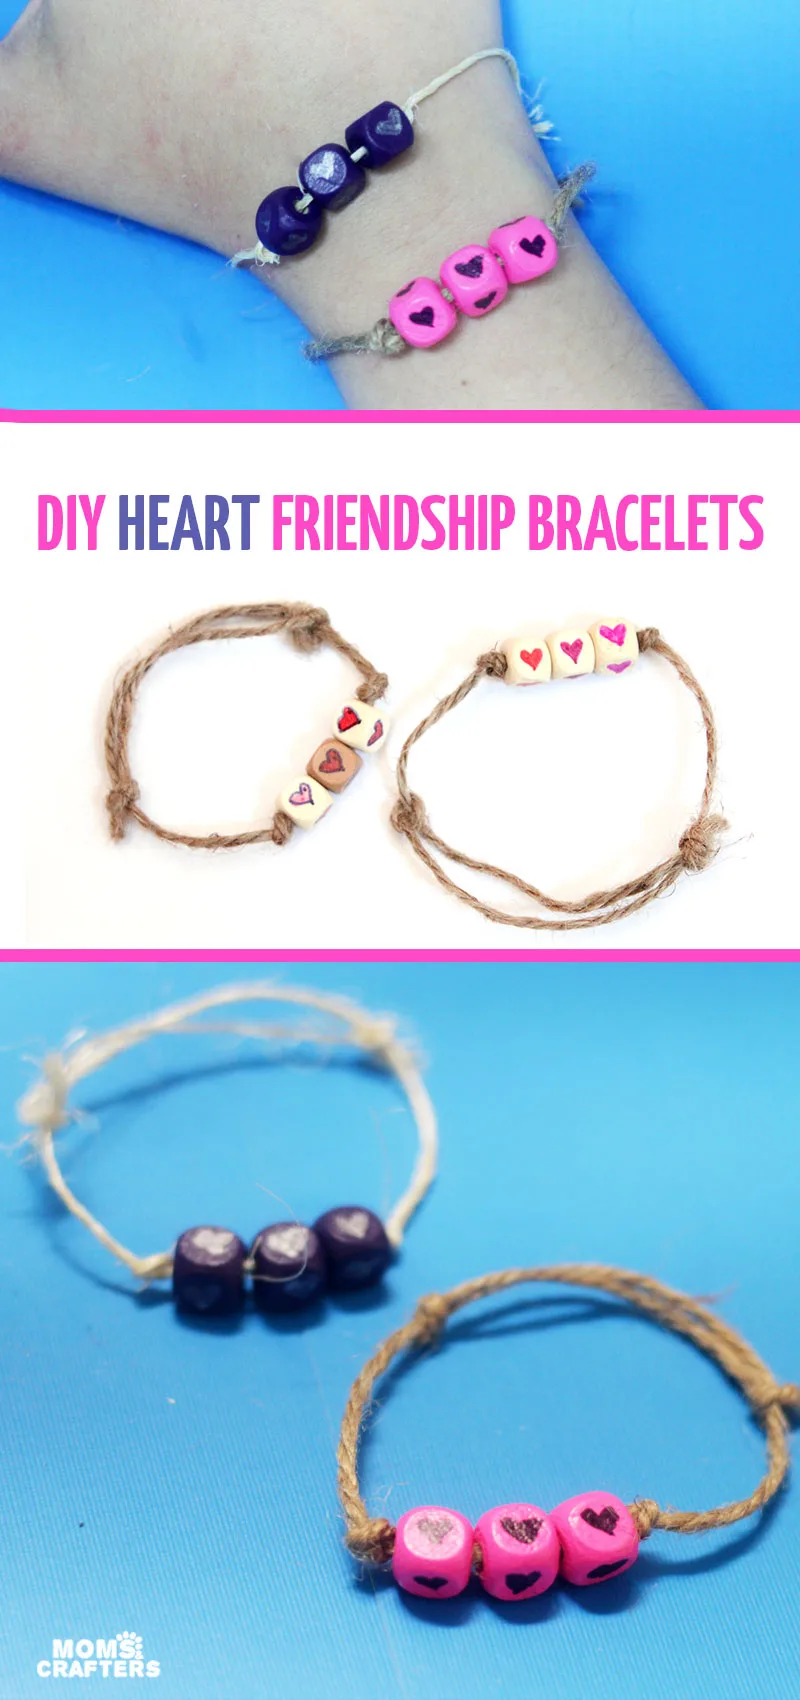 How to make DIY heart friendship bracelets - a budget friendly and time friendly craft - perfect for valentines day!!